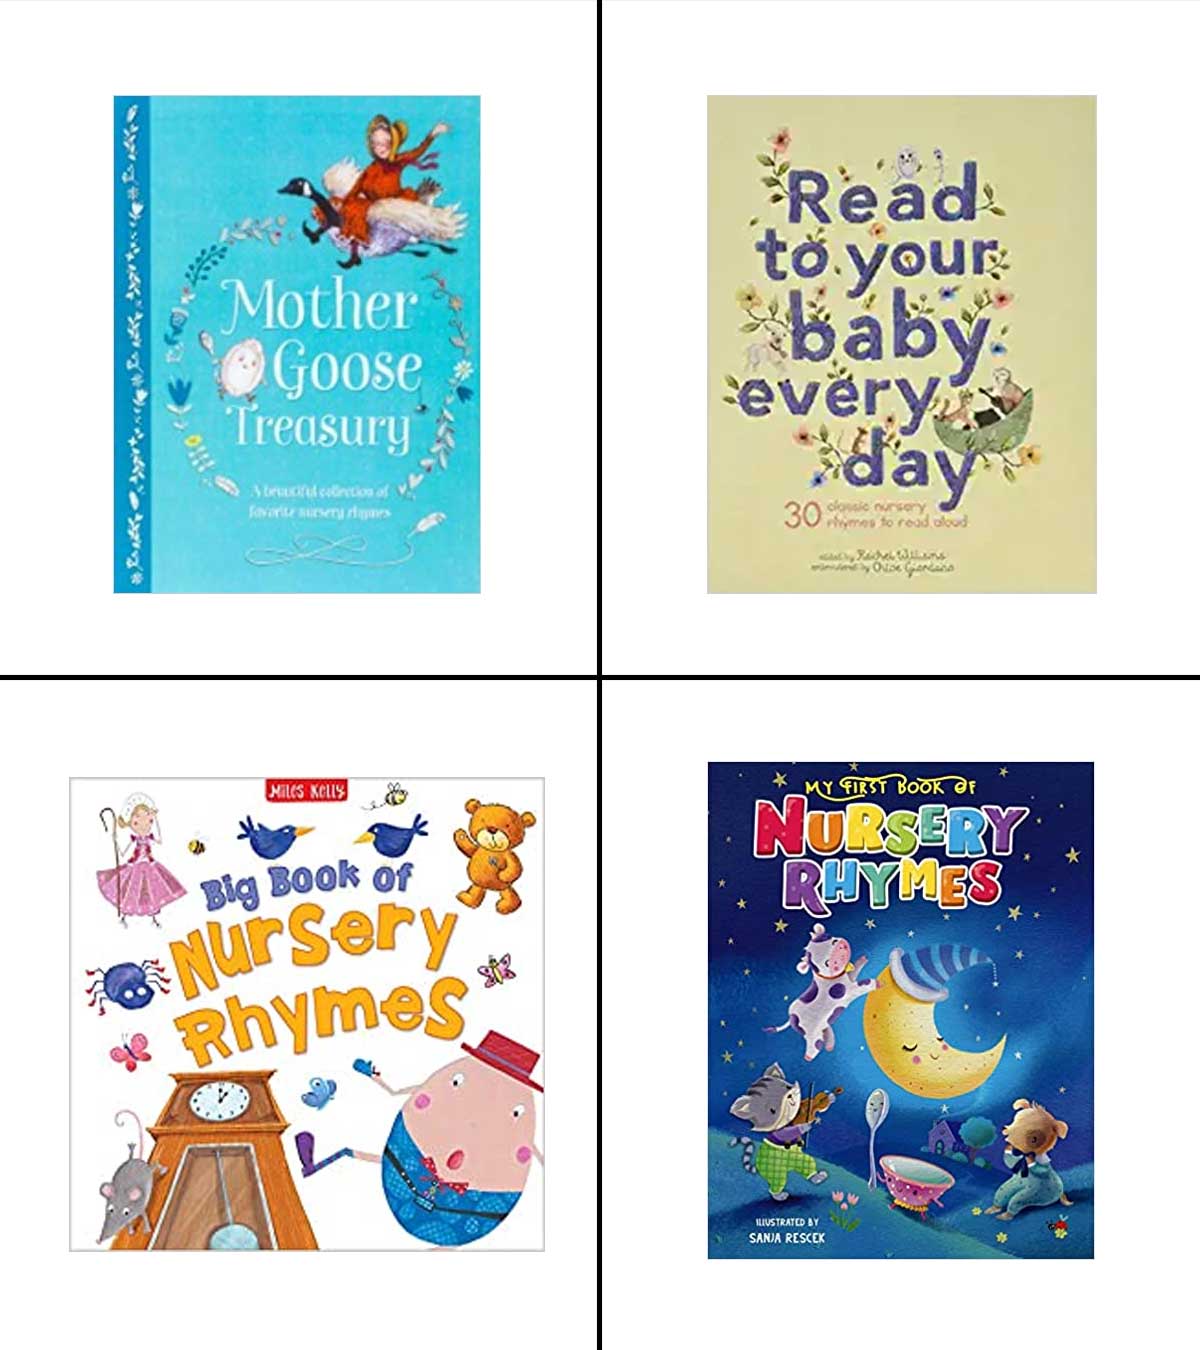 rhyming-books-for-toddlers-preschoolers-rhyming-books-toddler